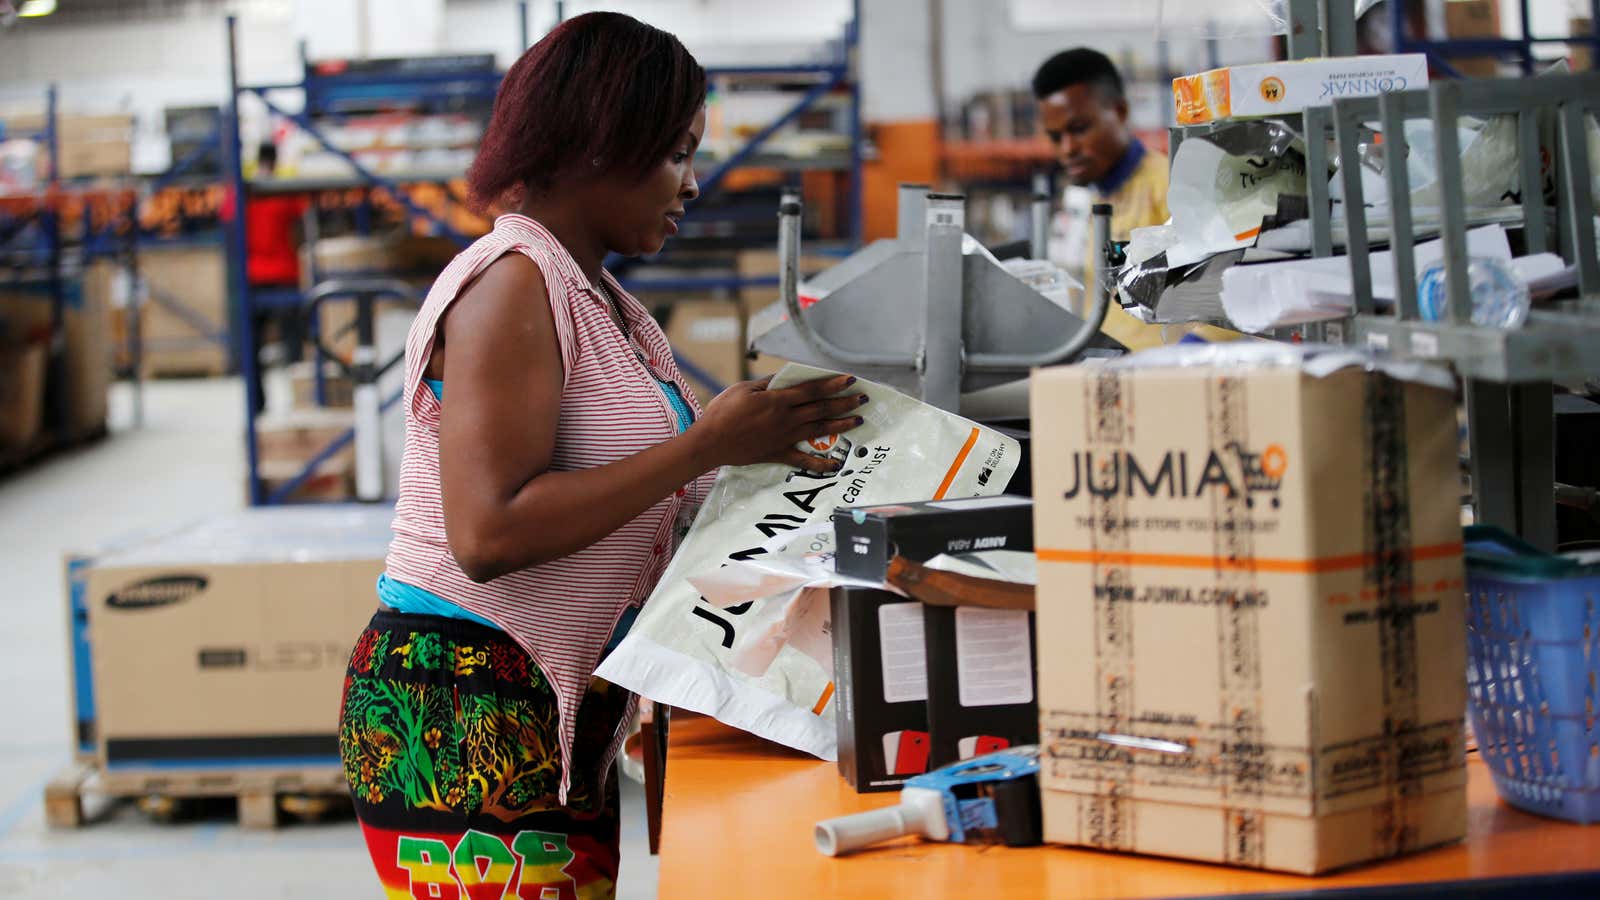 Speed of delivery is increasing at Jumia